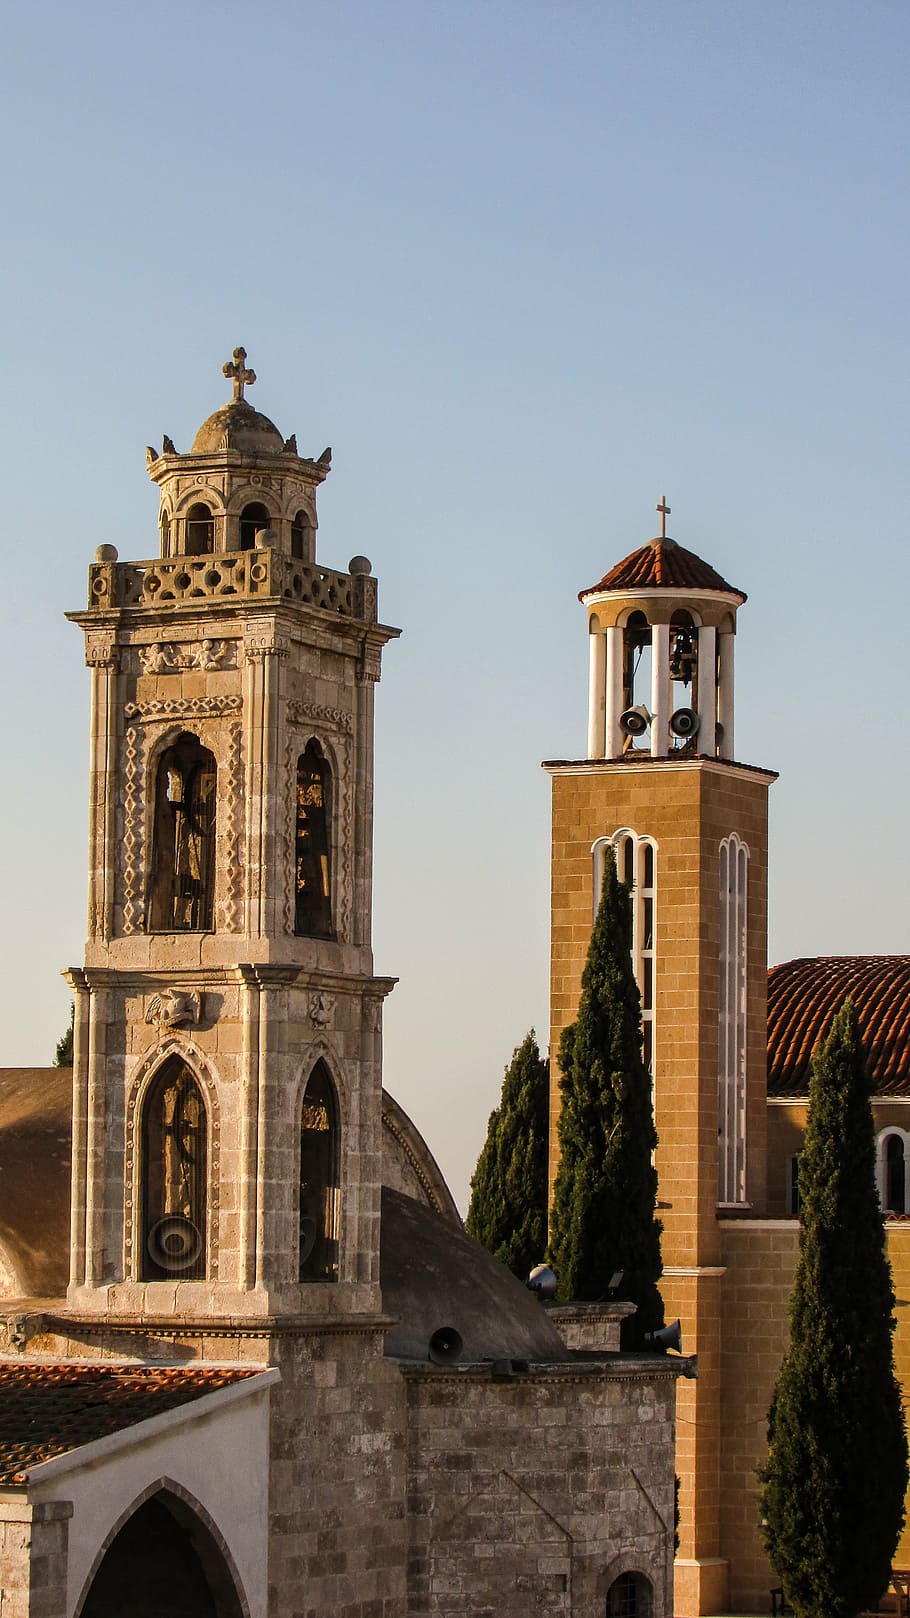 belfry, church, architecture, religion, tower, christianity